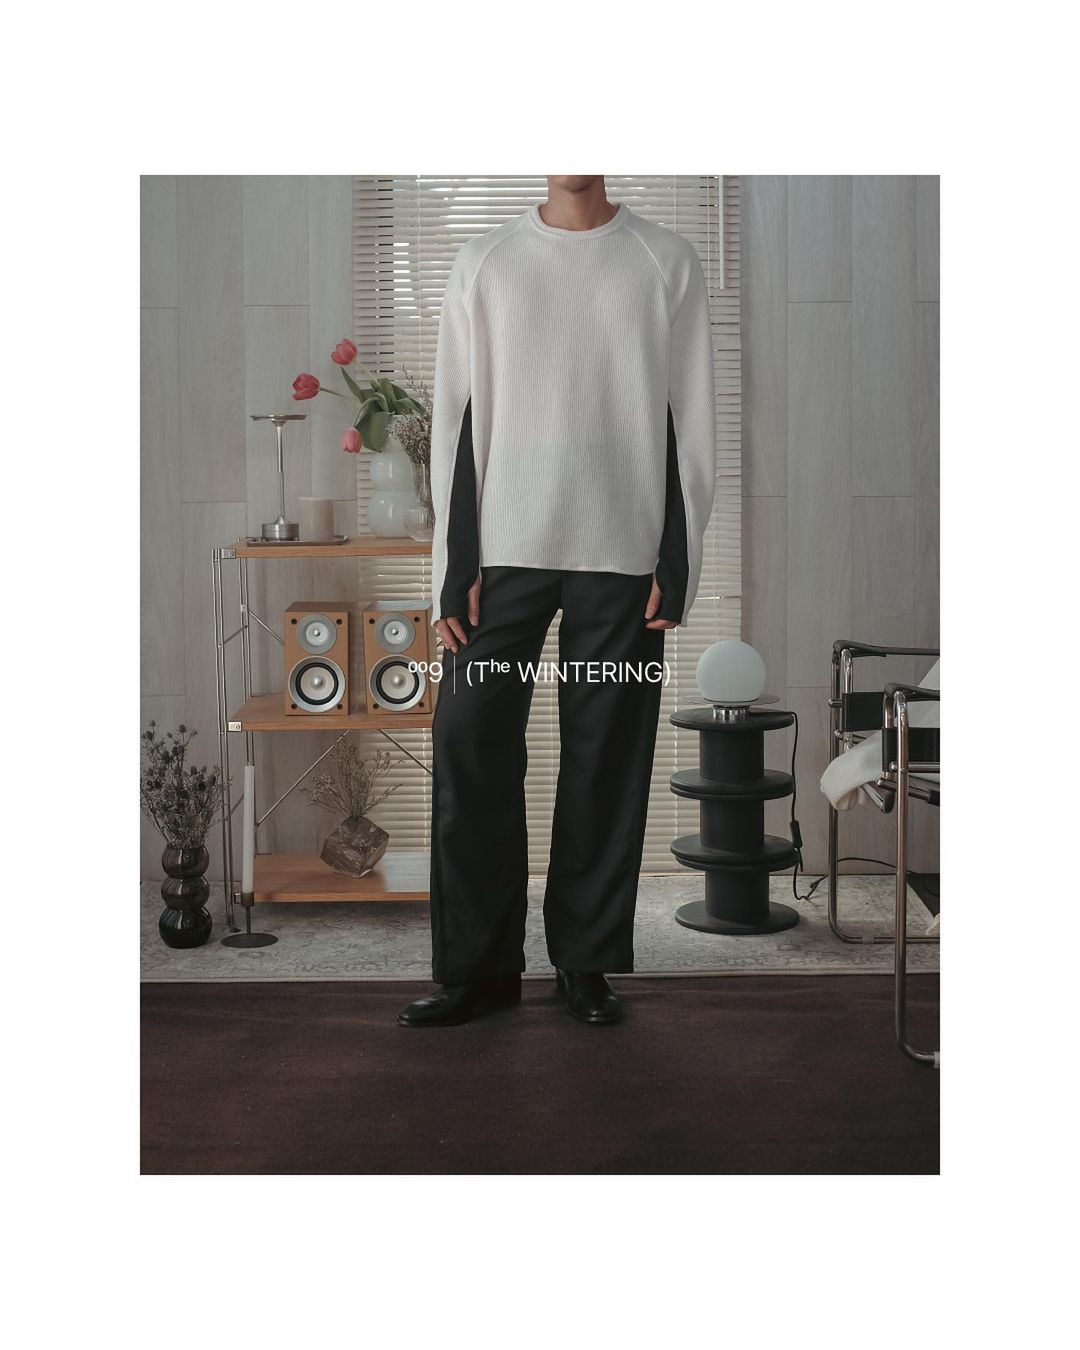 Sporty Round-Neck Sweater in Off-White/Black